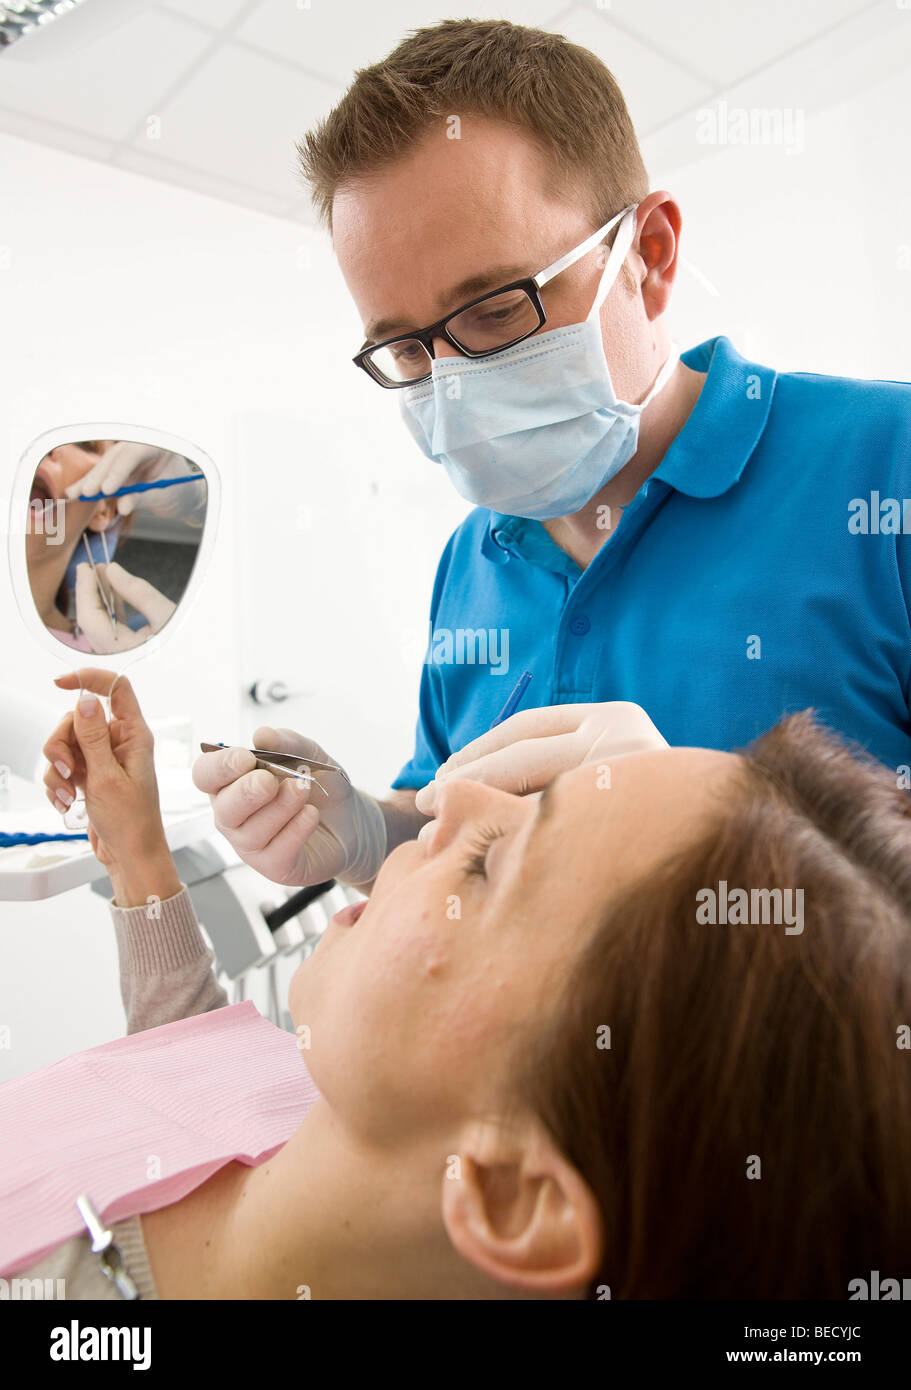 Patient looking into a hand mirror during a dental check Stock Photo